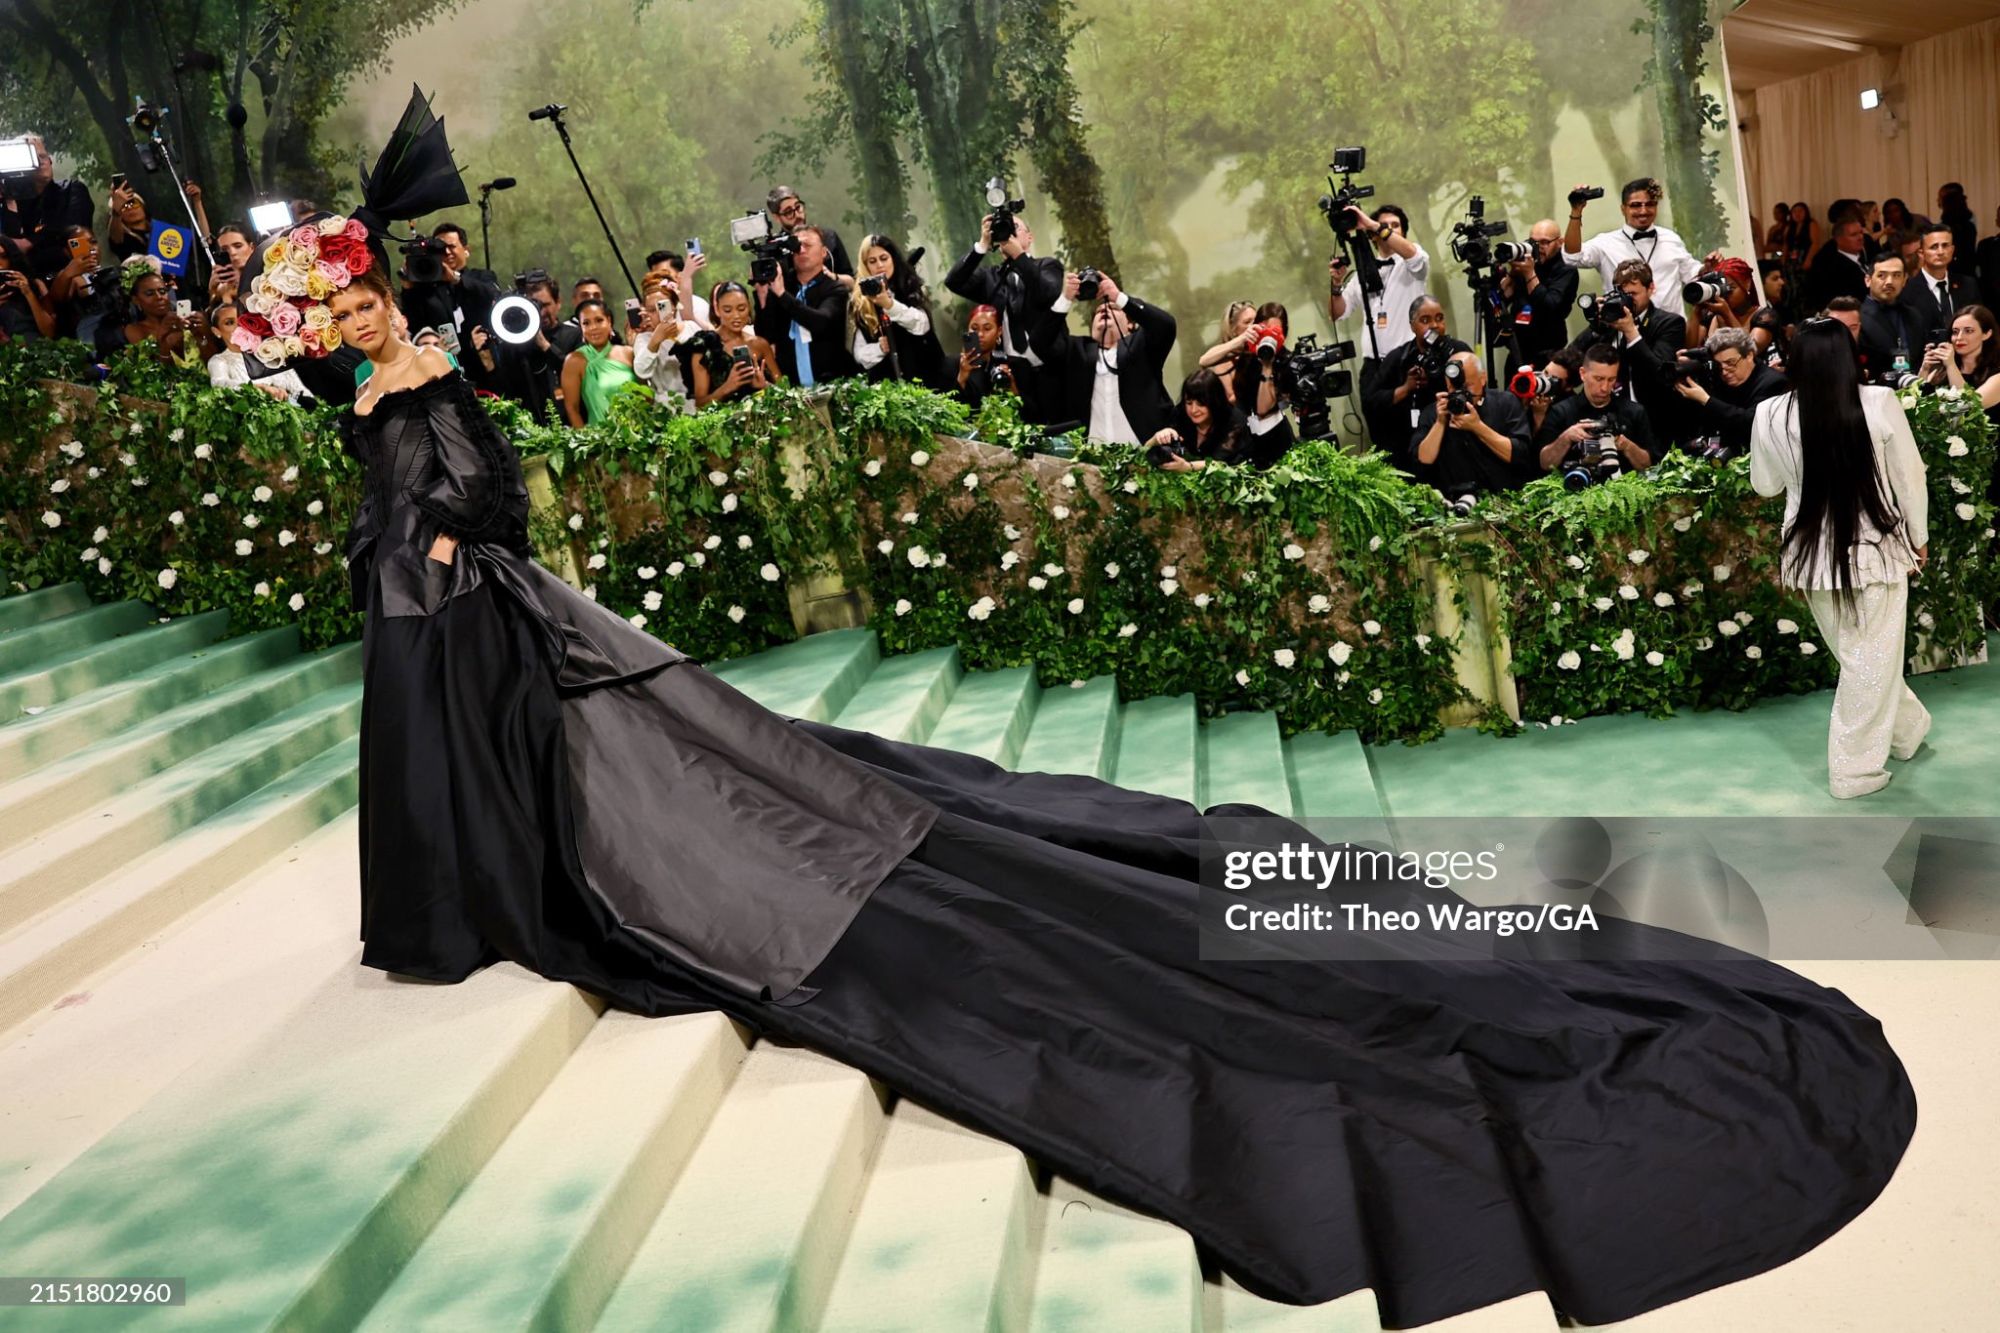 gettyimages-2151802960-2048x2048.jpg